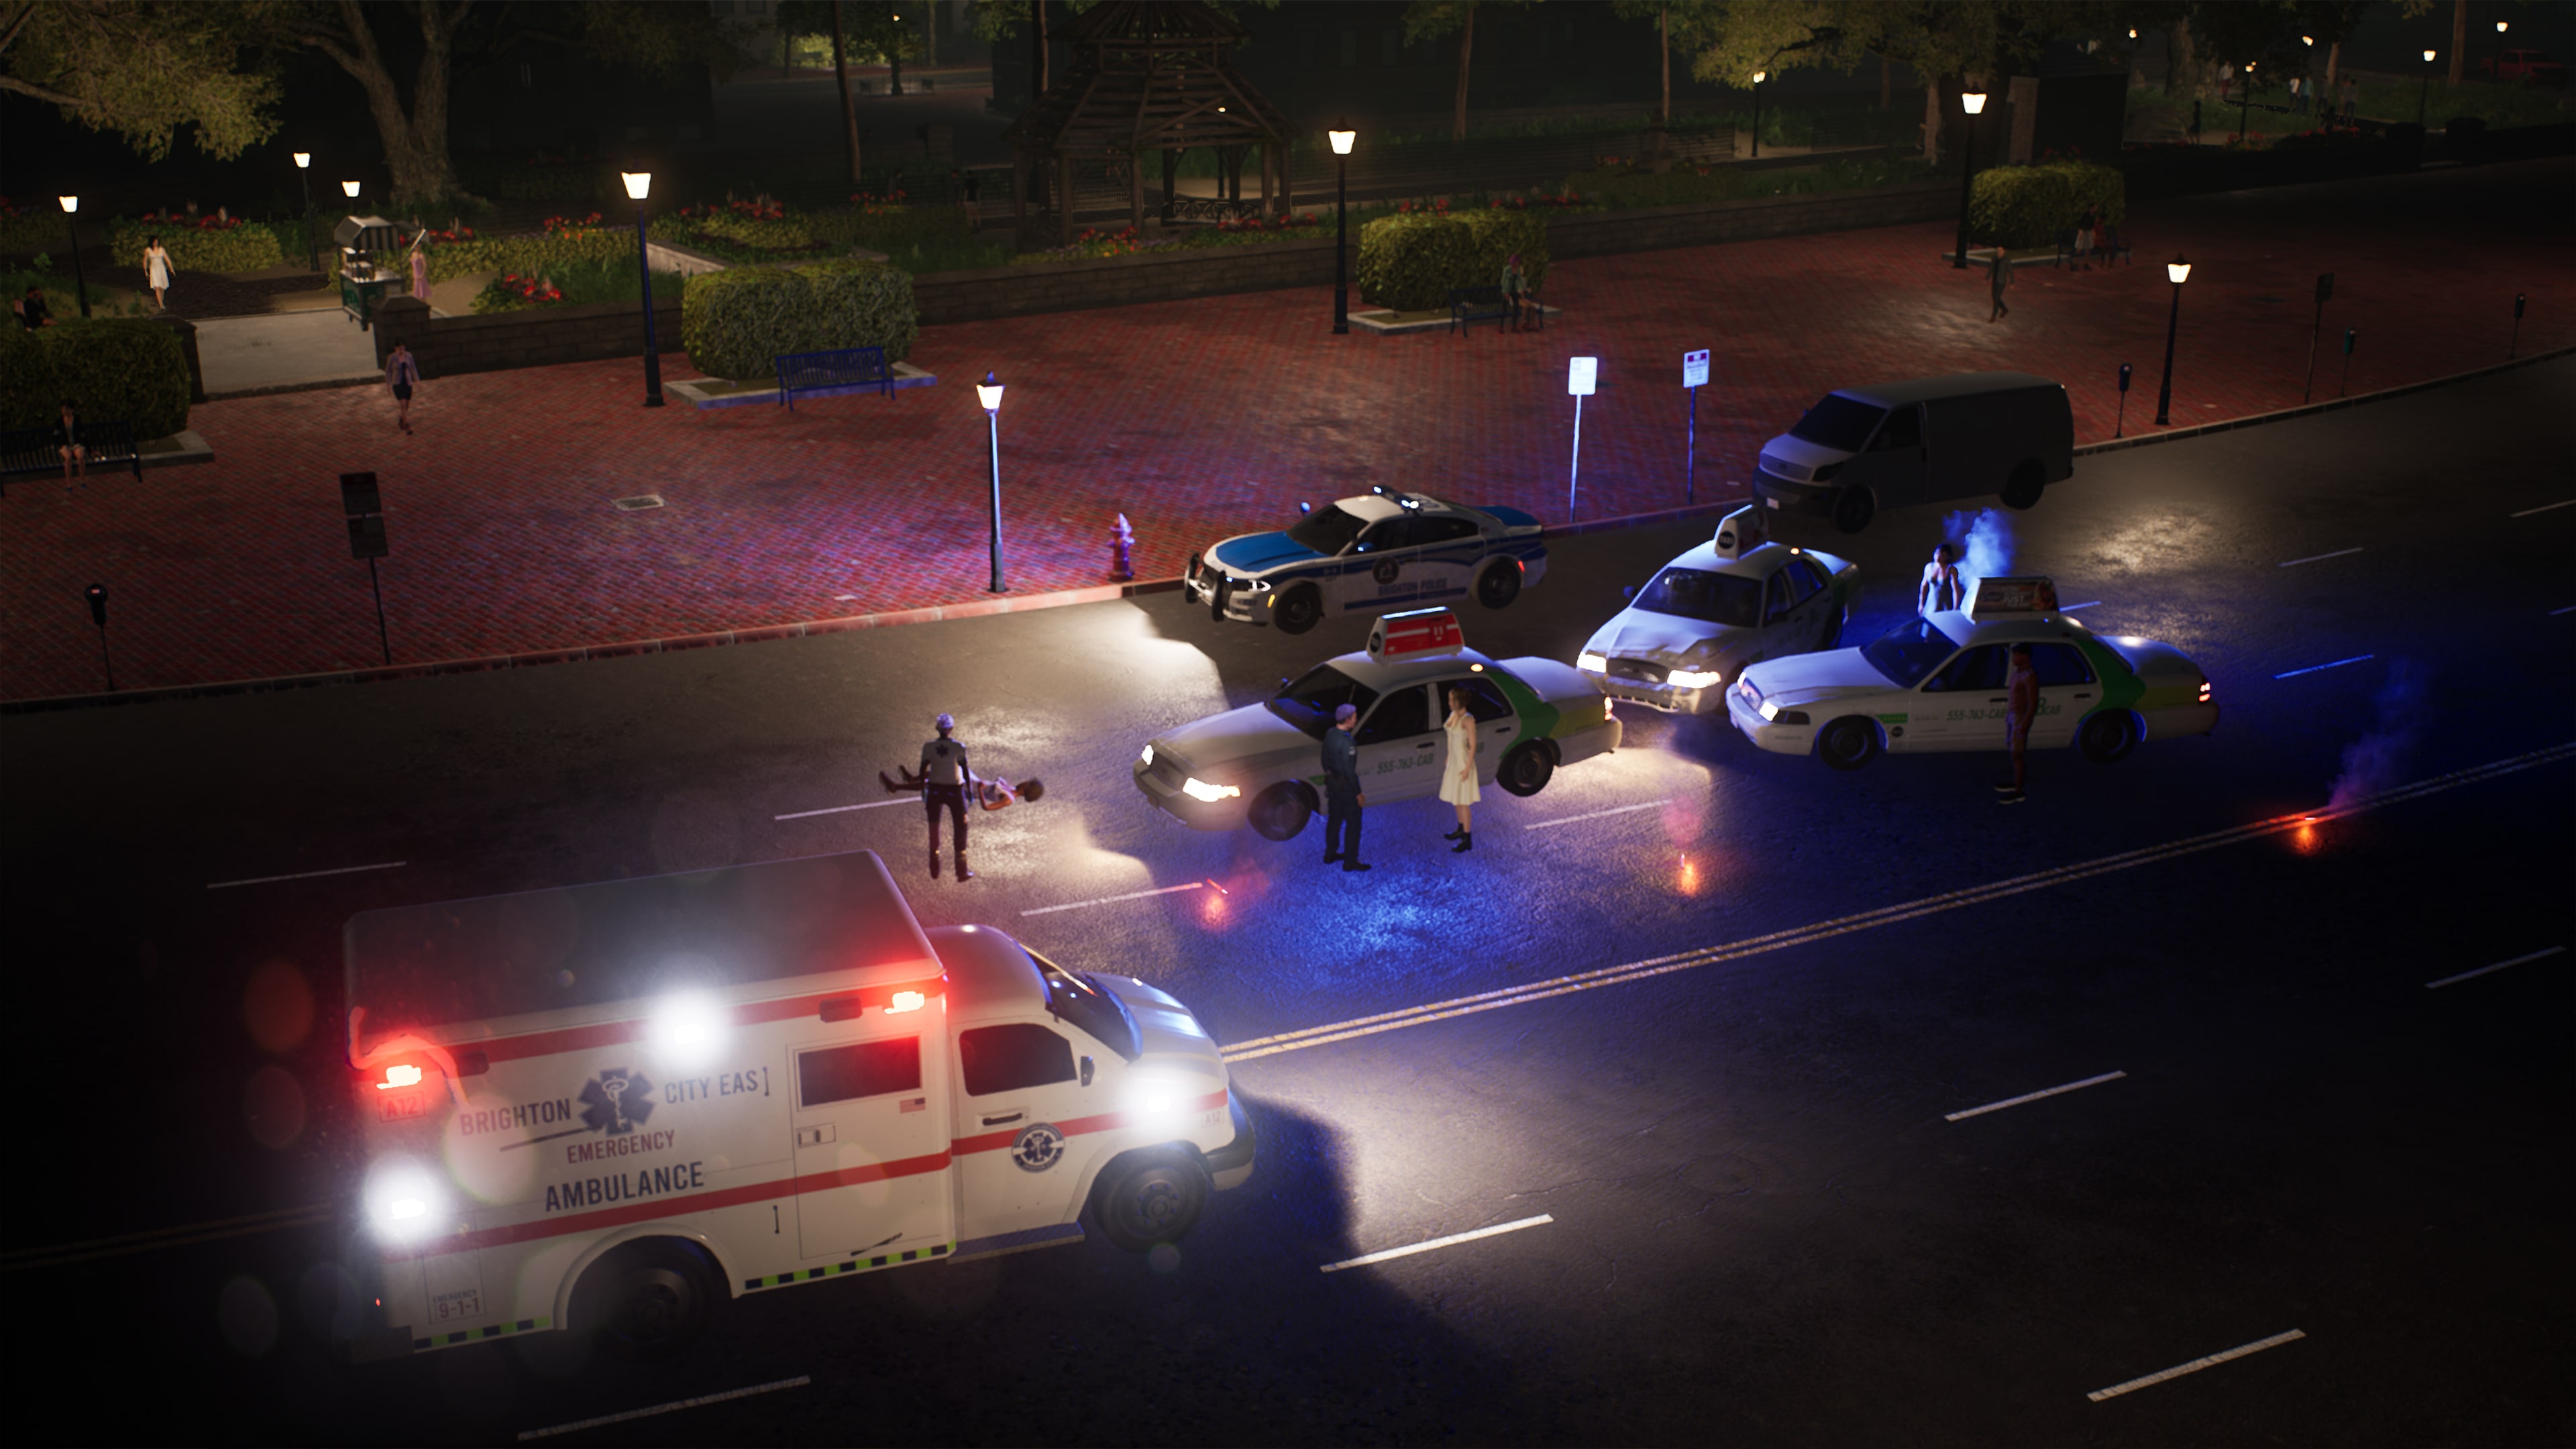 Vehicle Police : Officers Police Patrol Simulator: DLC Compact